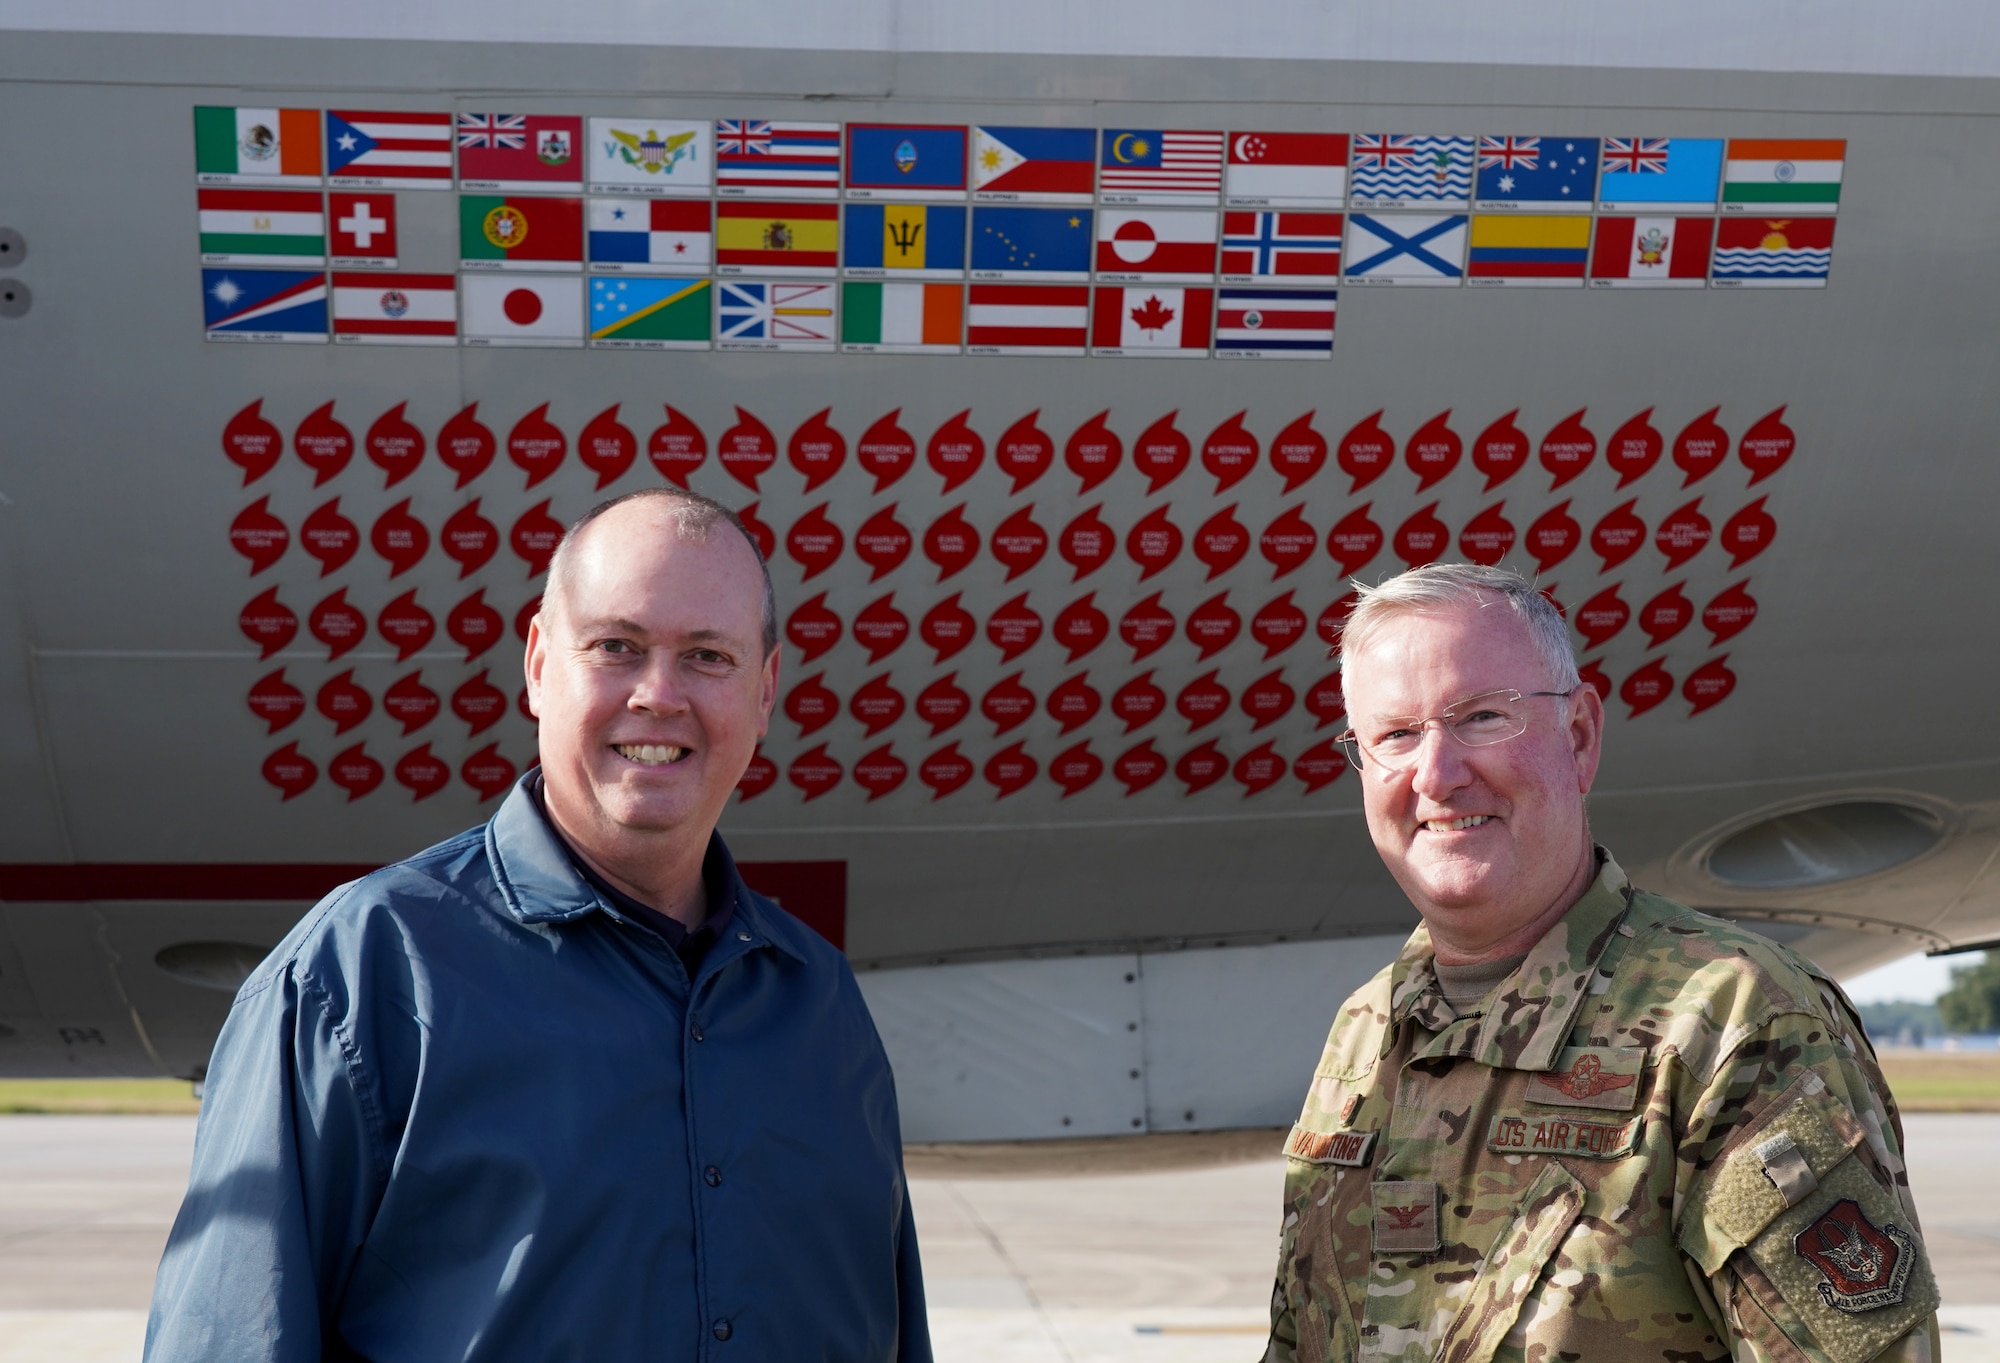 Ken Graham, director of the National Hurricane Center in Miami, and Col. Jeffrey A. Van Dootingh, 403rd Wing commander, pose for photo in front of a WP-3D Orion at Keesler Air Force Base Nov. 13, 2019. The aircraft is used by the National Oceanic and Atmospheric Administration's Aircraft Operations Center Hurricane Hunters to fly into hurricanes. (U.S. Air Force photo by Senior Airman Kristen Pittman)